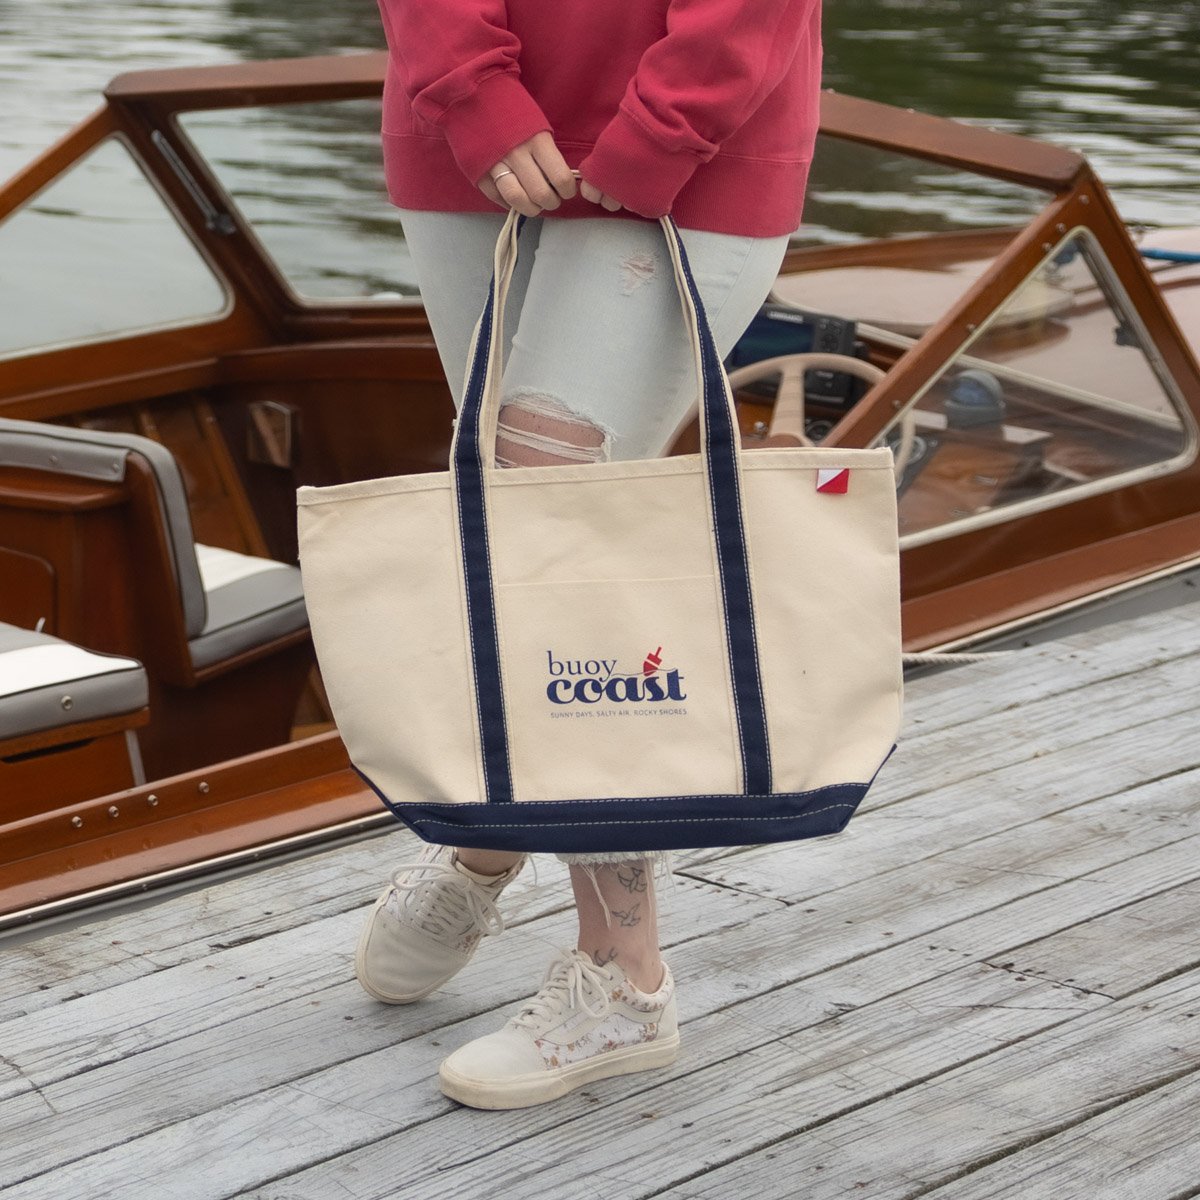 Salt Water New England LL Bean Boat and Tote Bags  The Complete Guide